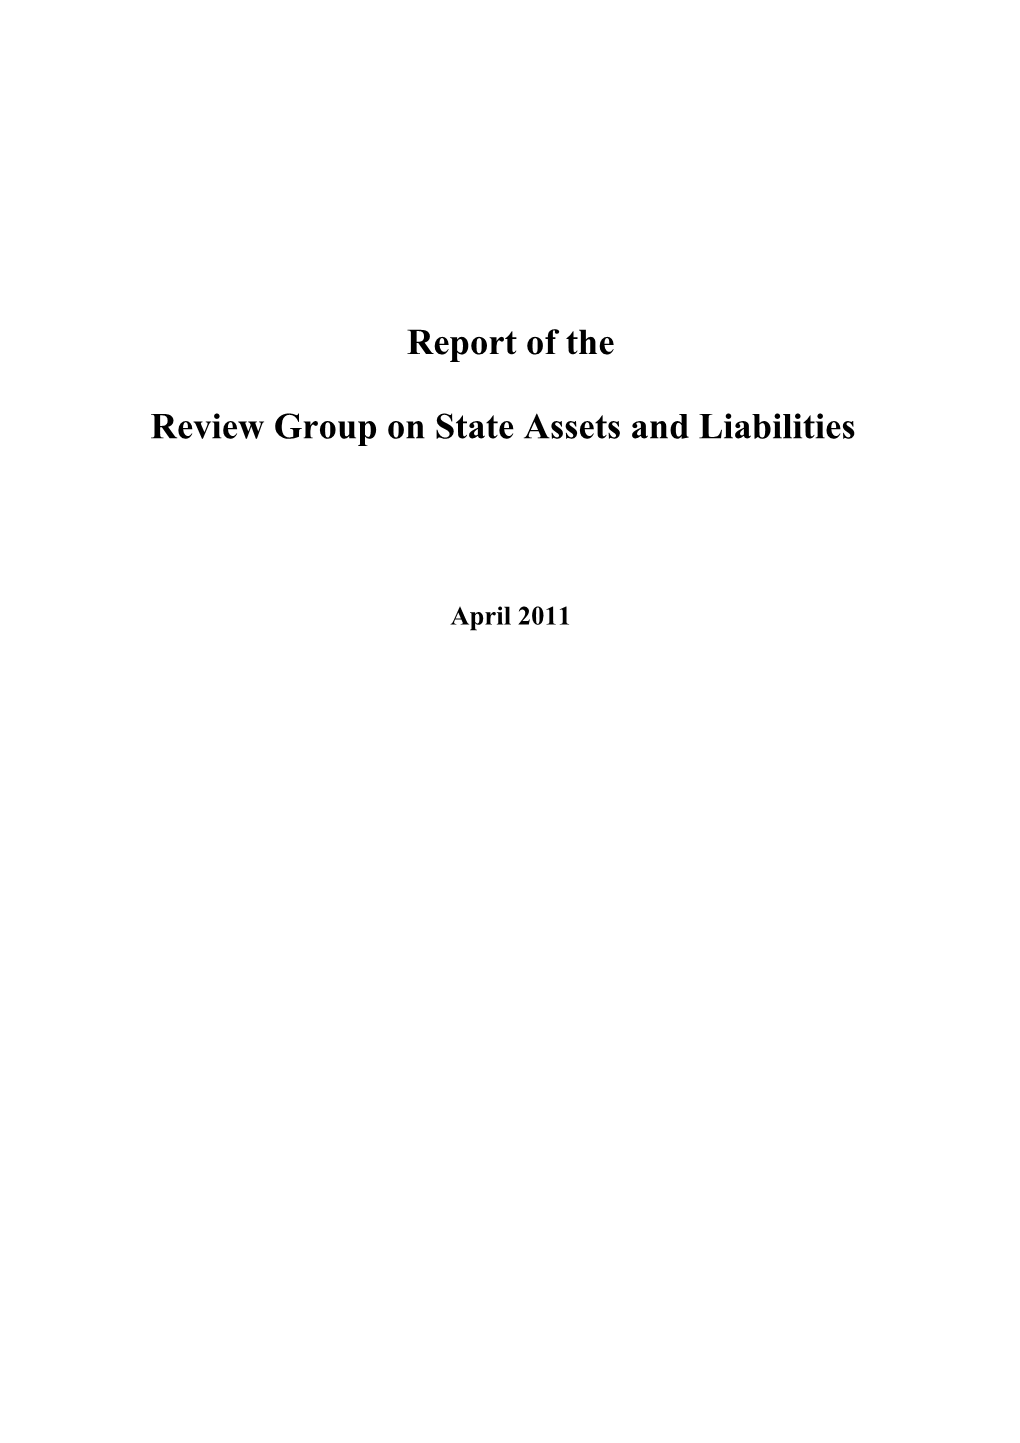 Report of the Review Group on State Assets and Liabilities